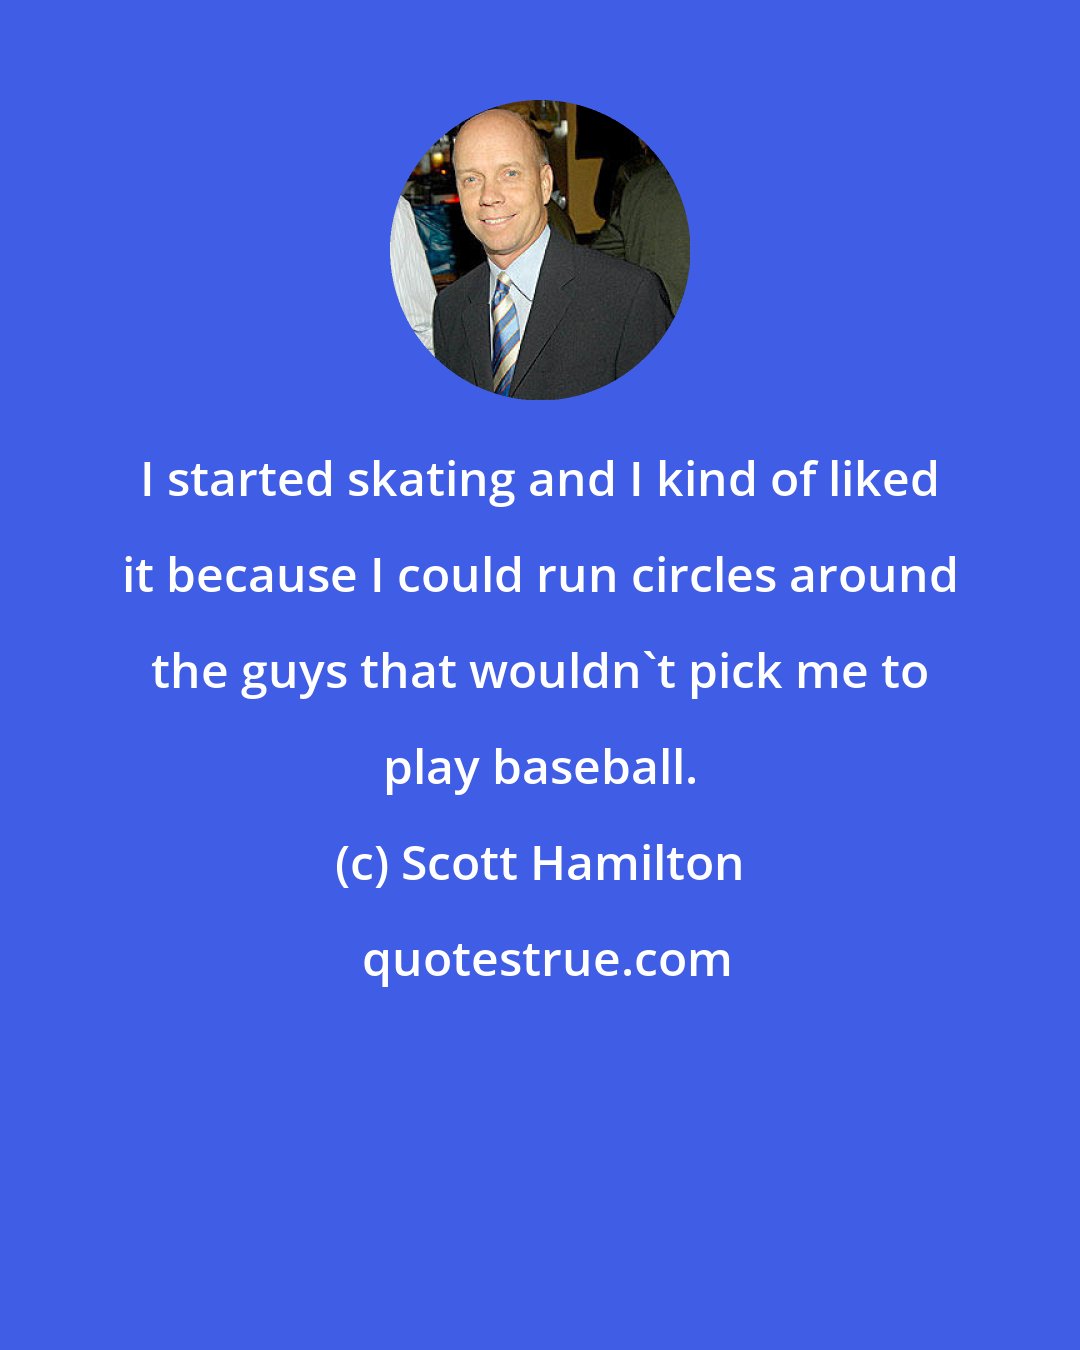 Scott Hamilton: I started skating and I kind of liked it because I could run circles around the guys that wouldn't pick me to play baseball.